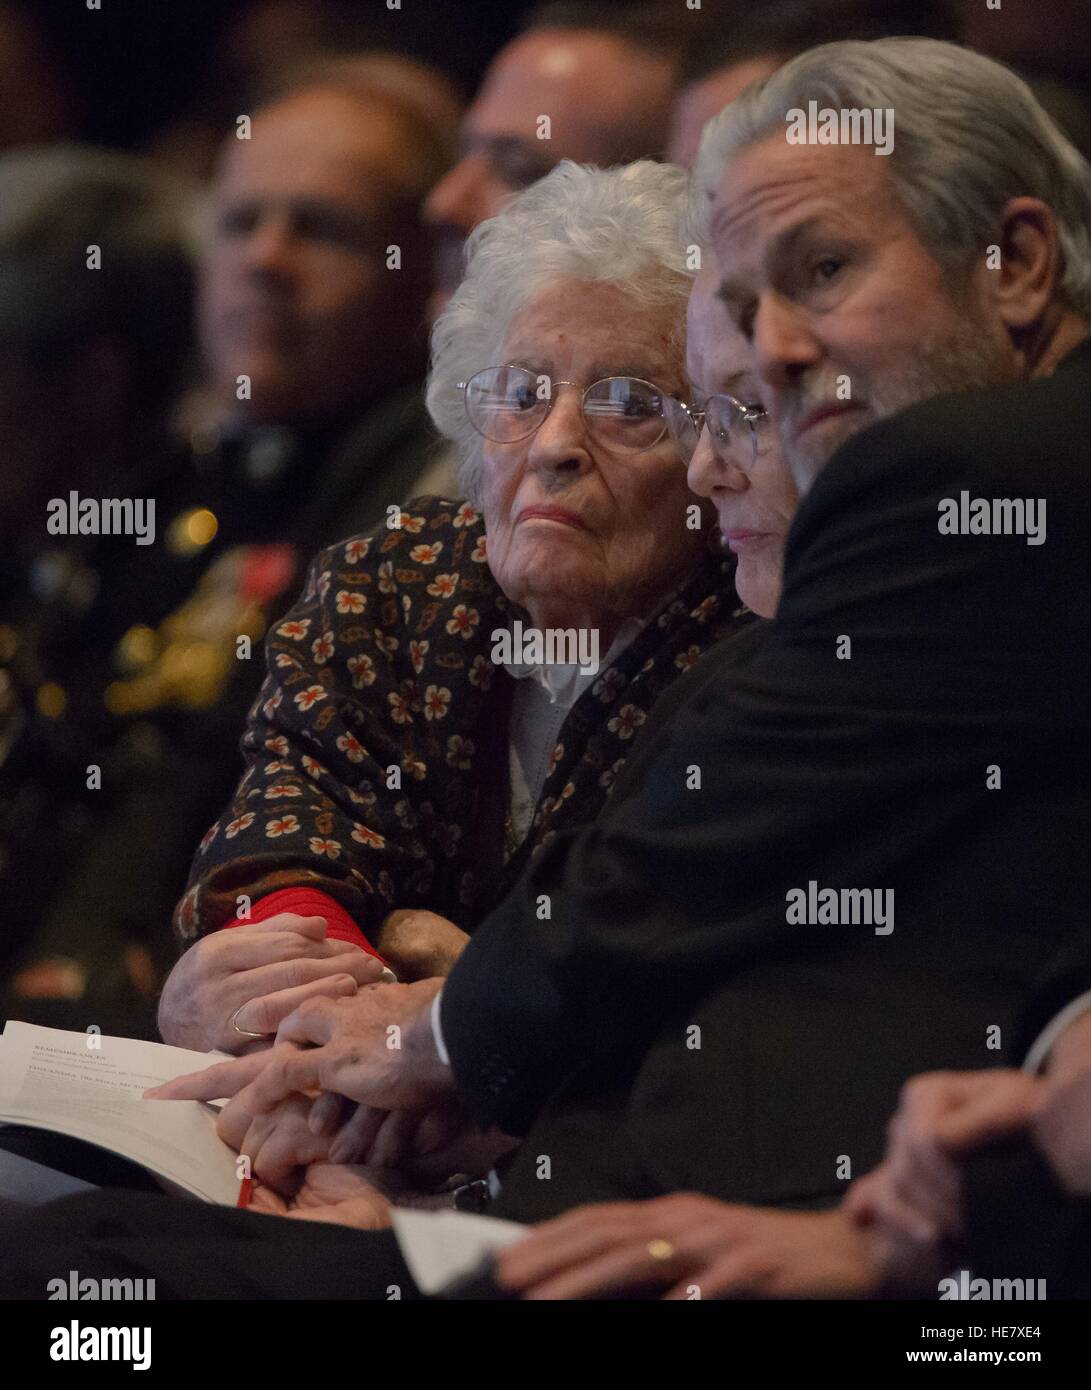 Annie Glenn, Widow of former astronaut and Senator John Glenn, left, Glen's daughter Lyn, and Pock Otis hold hands during a service celebrating his life at Ohio State University December 17, 2016 in Columbus, Ohio. The former Marine pilot, Senator and first man to orbit the earth died last week at the age of 95. Stock Photo